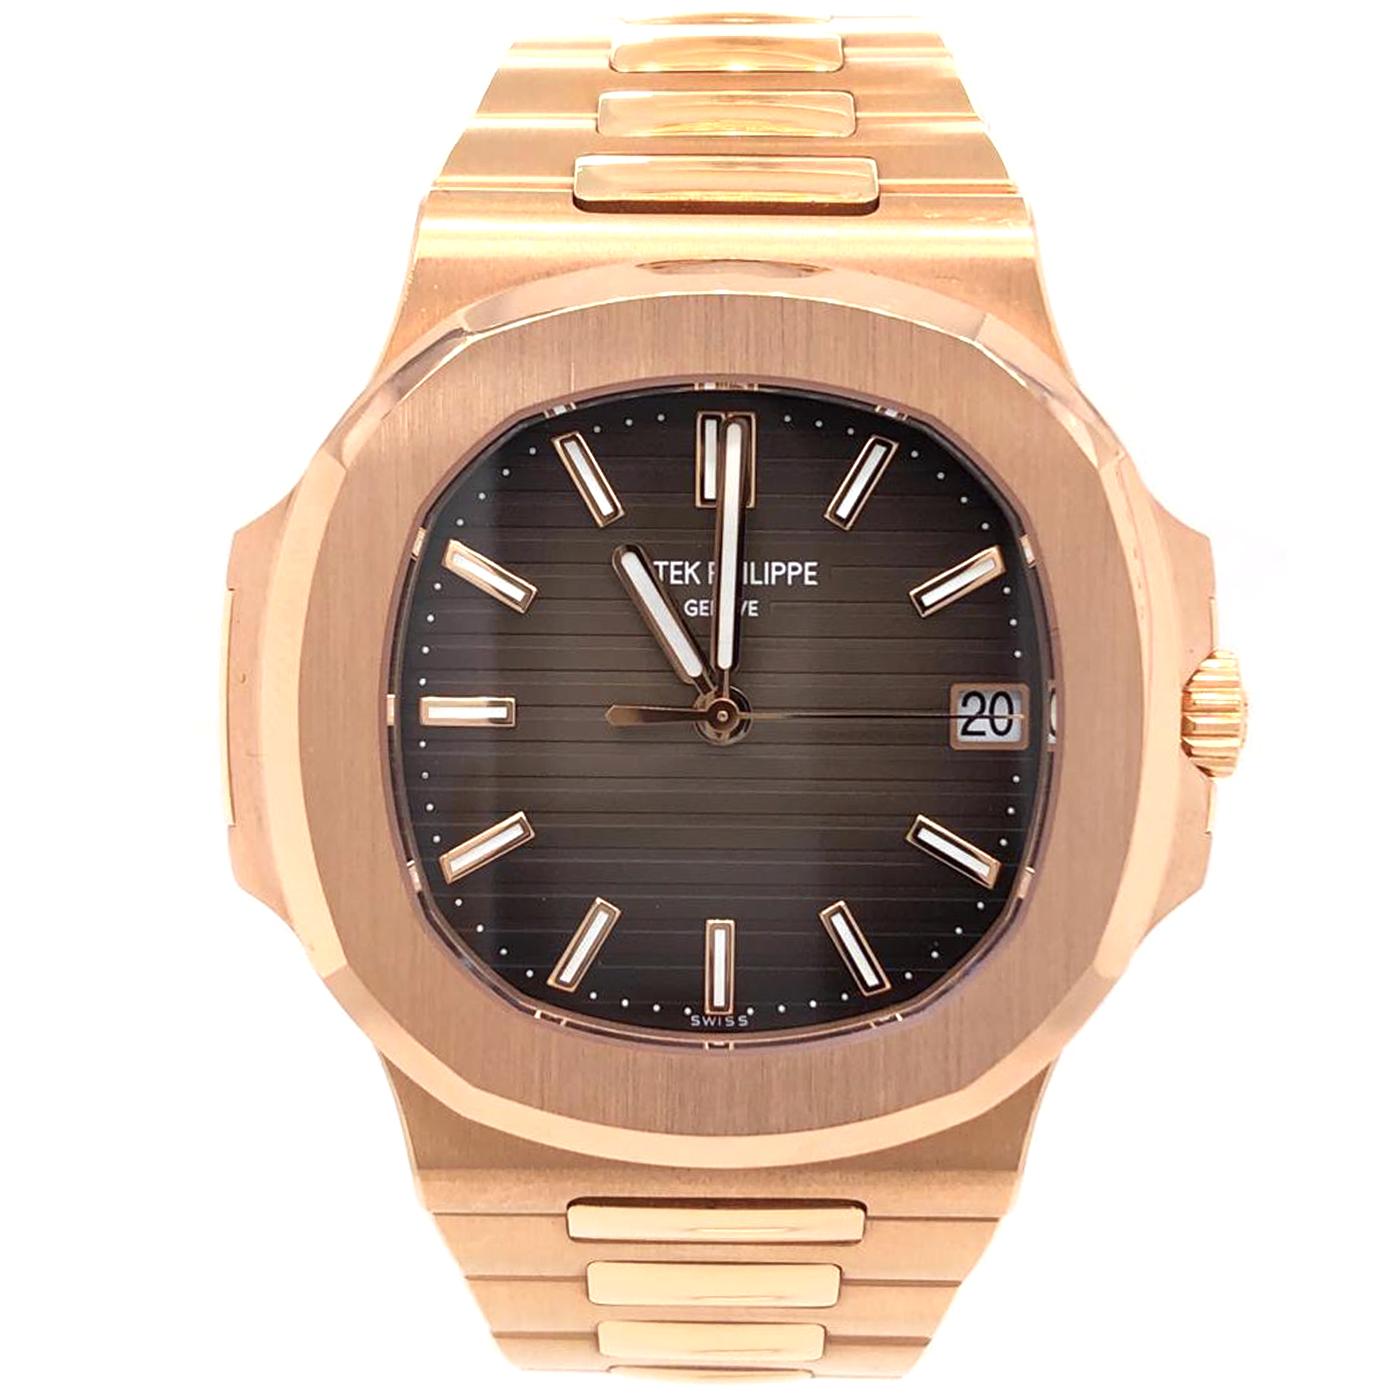 Patek Philippe Nautilus 18K Rose Gold Automatic Men's Watch 5711/1R-001 In Excellent Condition For Sale In Aventura, FL